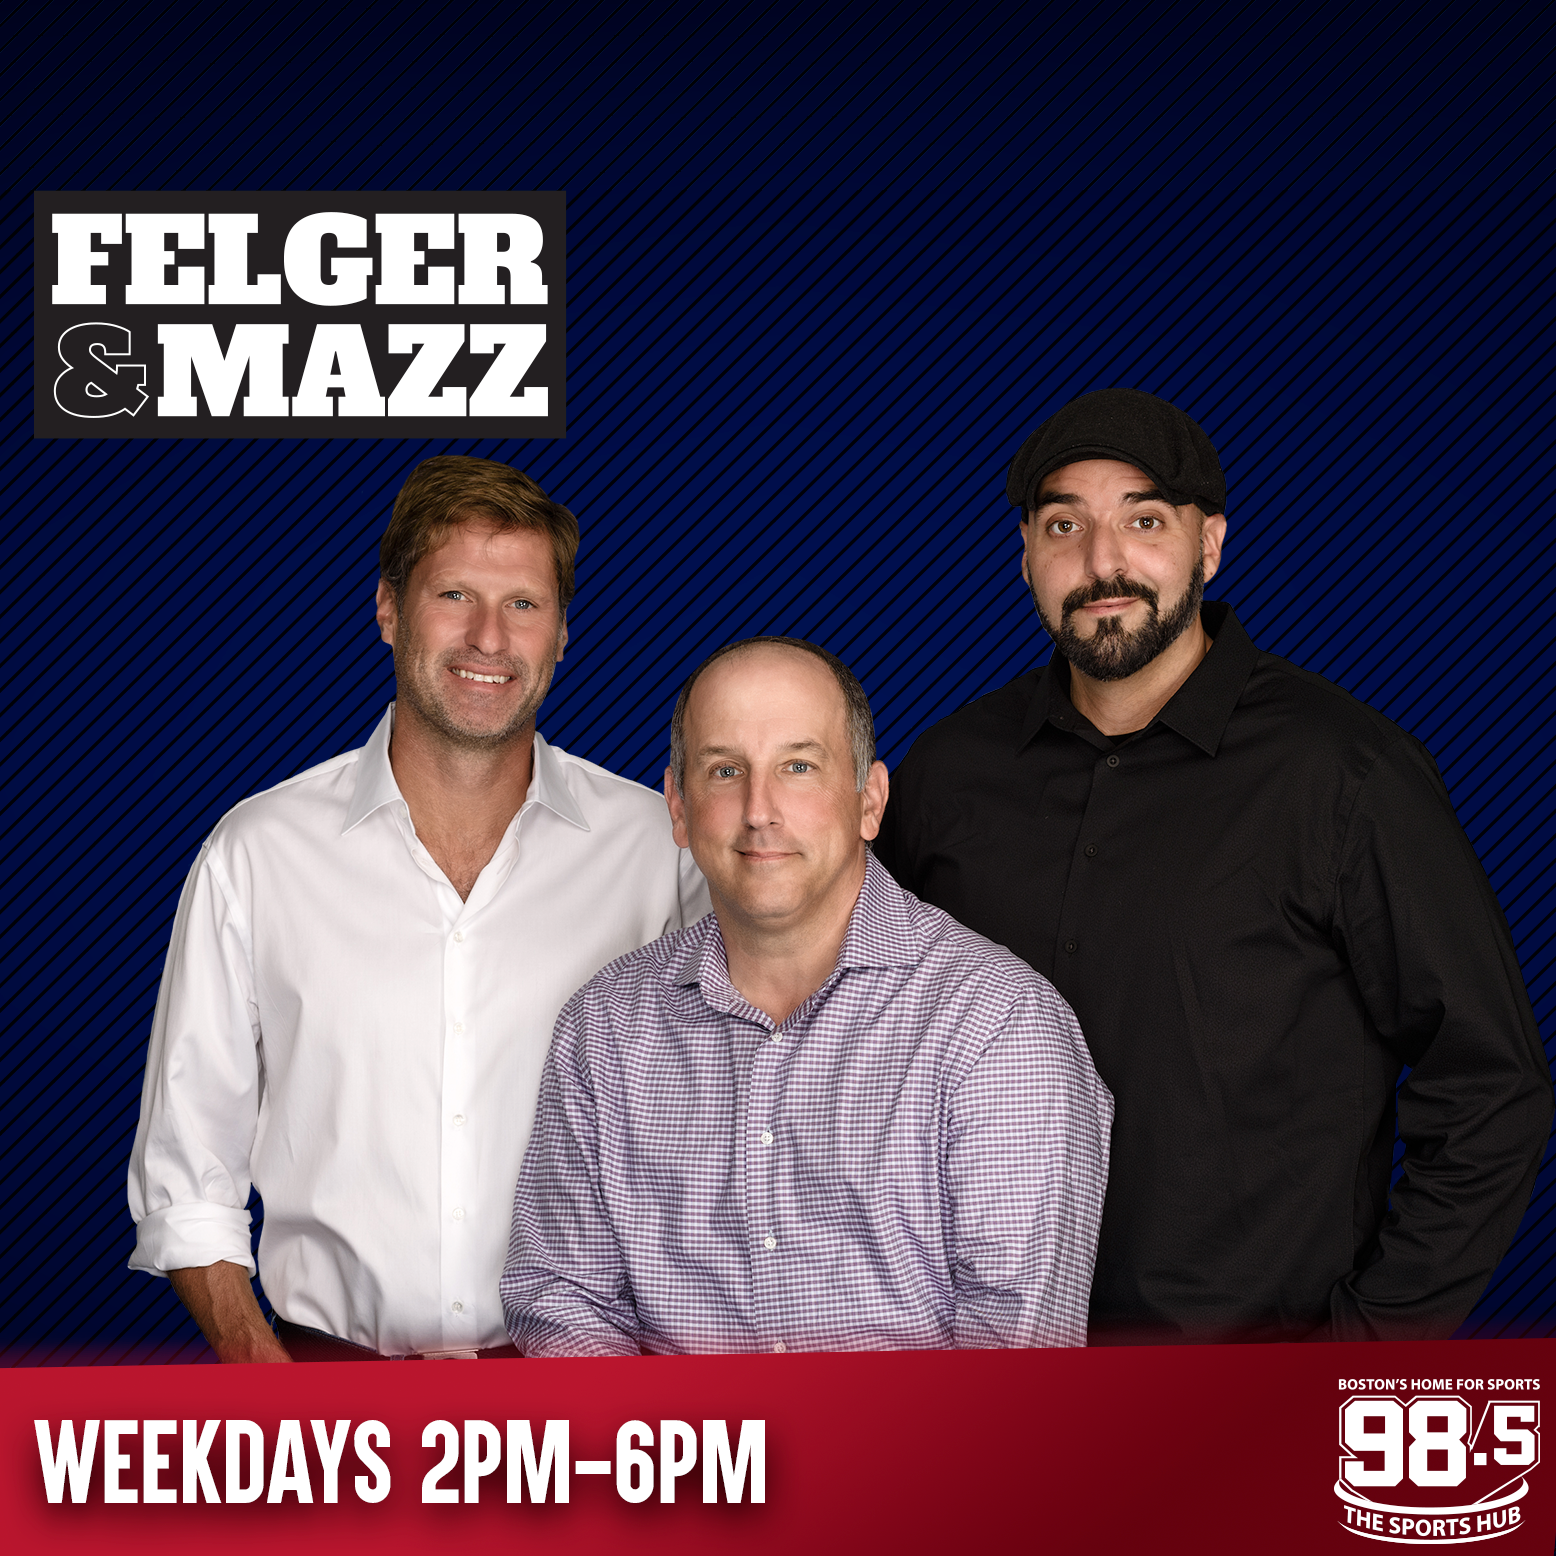 Felger & Mazz: The Patriots Next Quarterback, the Return of Sports, and the Final Word (Hour 4)